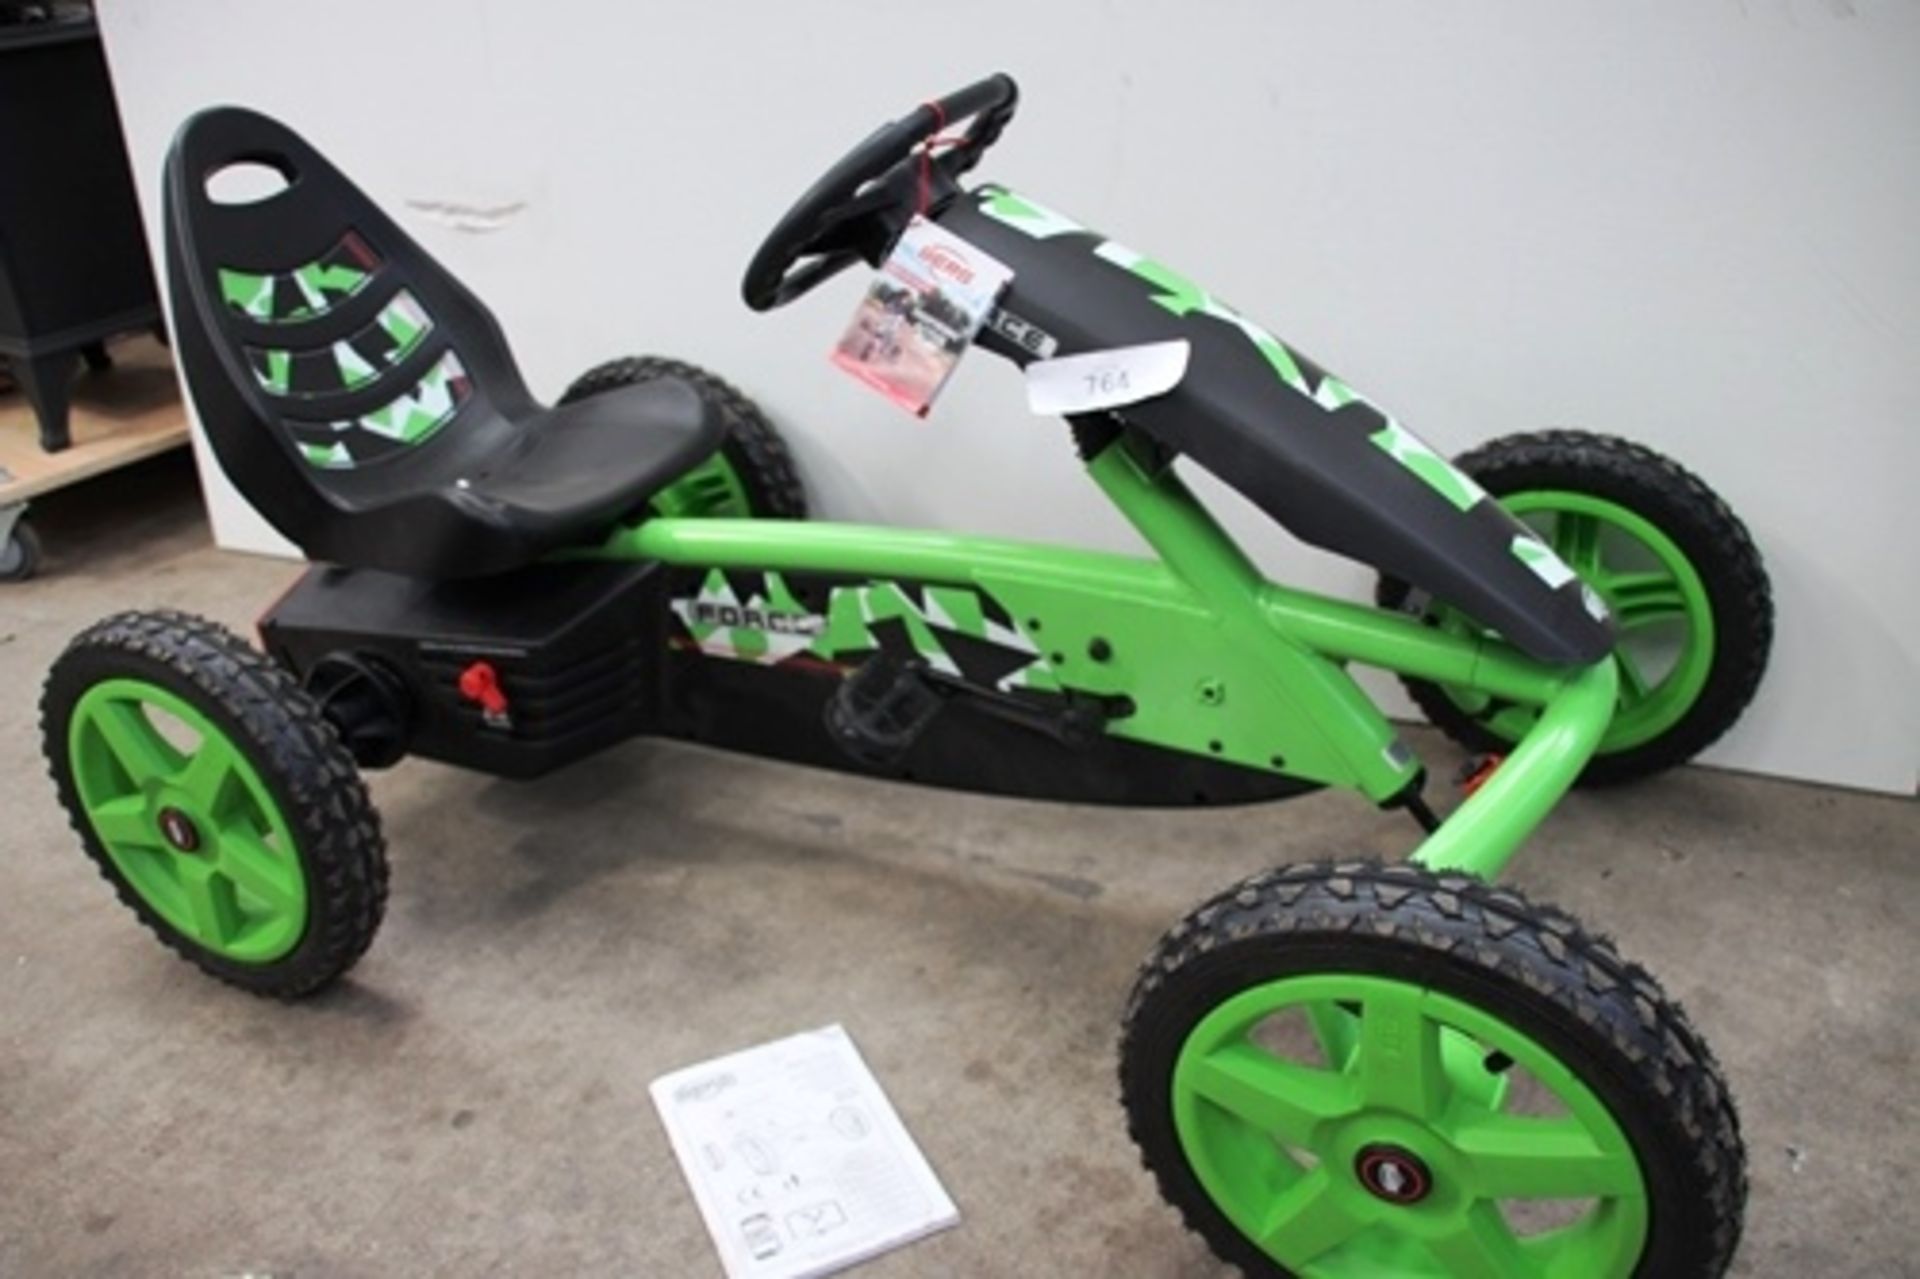 1 x Berg Rally Force Go Kart size 4-12 years Assembled and complete. -new- (ES9).